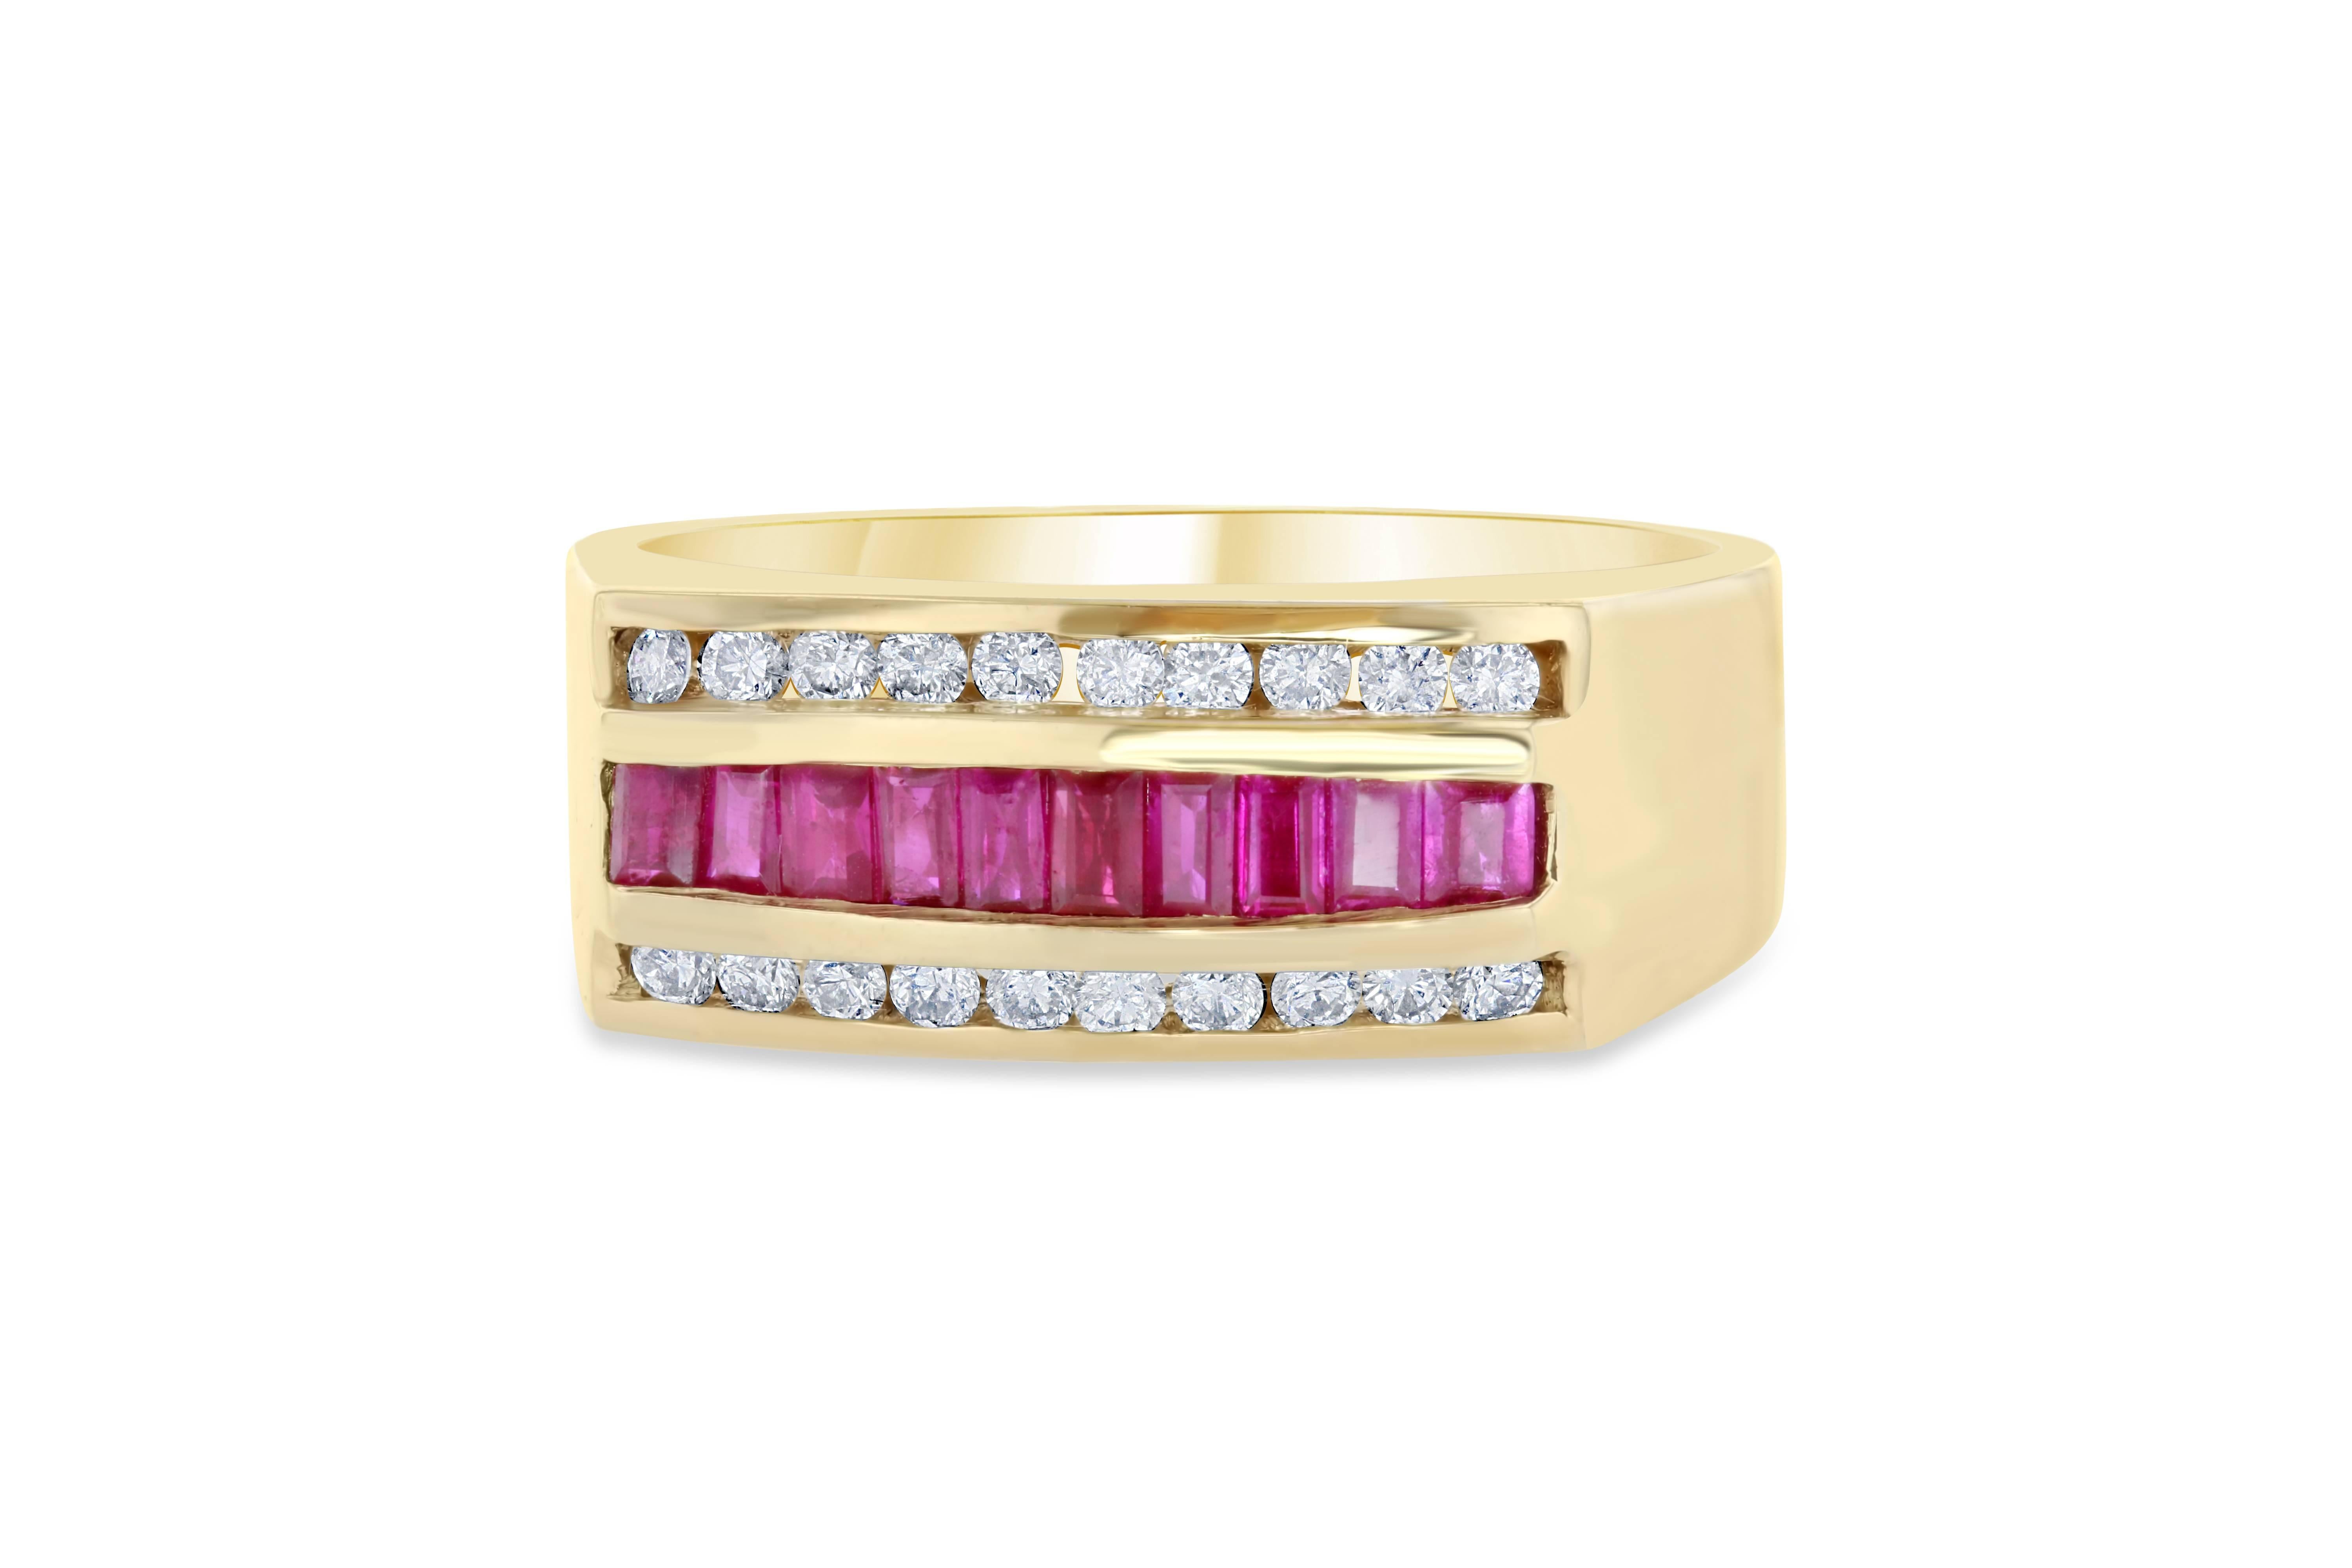 We also carry a Mens' Collection! 
This unique Mens' Ring is set with 10 Baguette Cut Rubies weighing 0.78 carat and is surrounded by 20 Round Cut Diamonds that weigh 0.37 carat. The Total Carat Weight of this ring is 1.15 Carats. It is crafted in